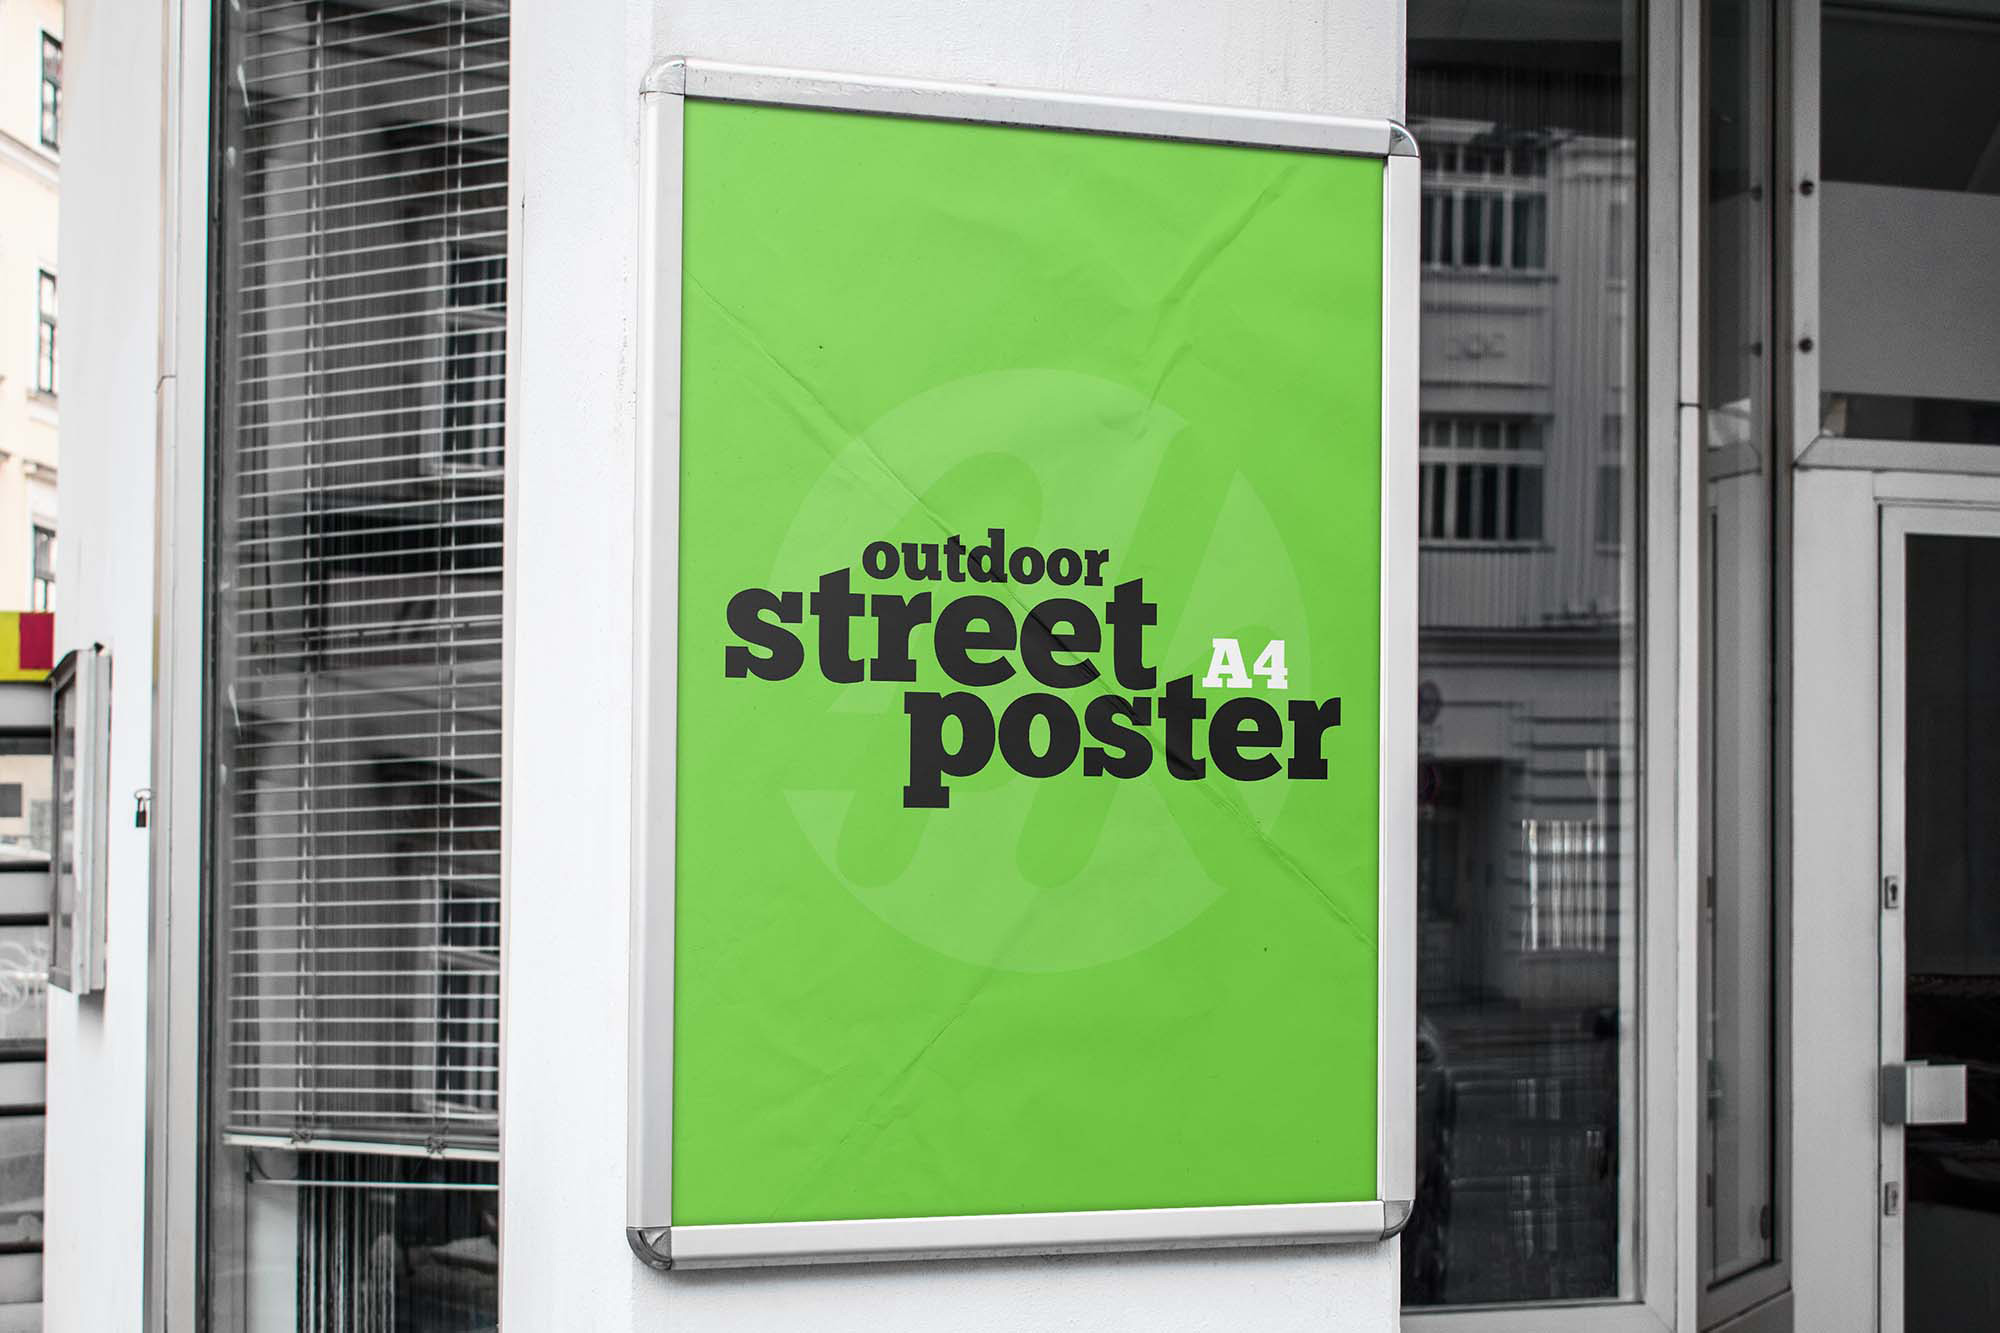 Download Free Street Poster Mockup Psd Free Mockups Best Free Psd Mockups Apemockups PSD Mockup Templates